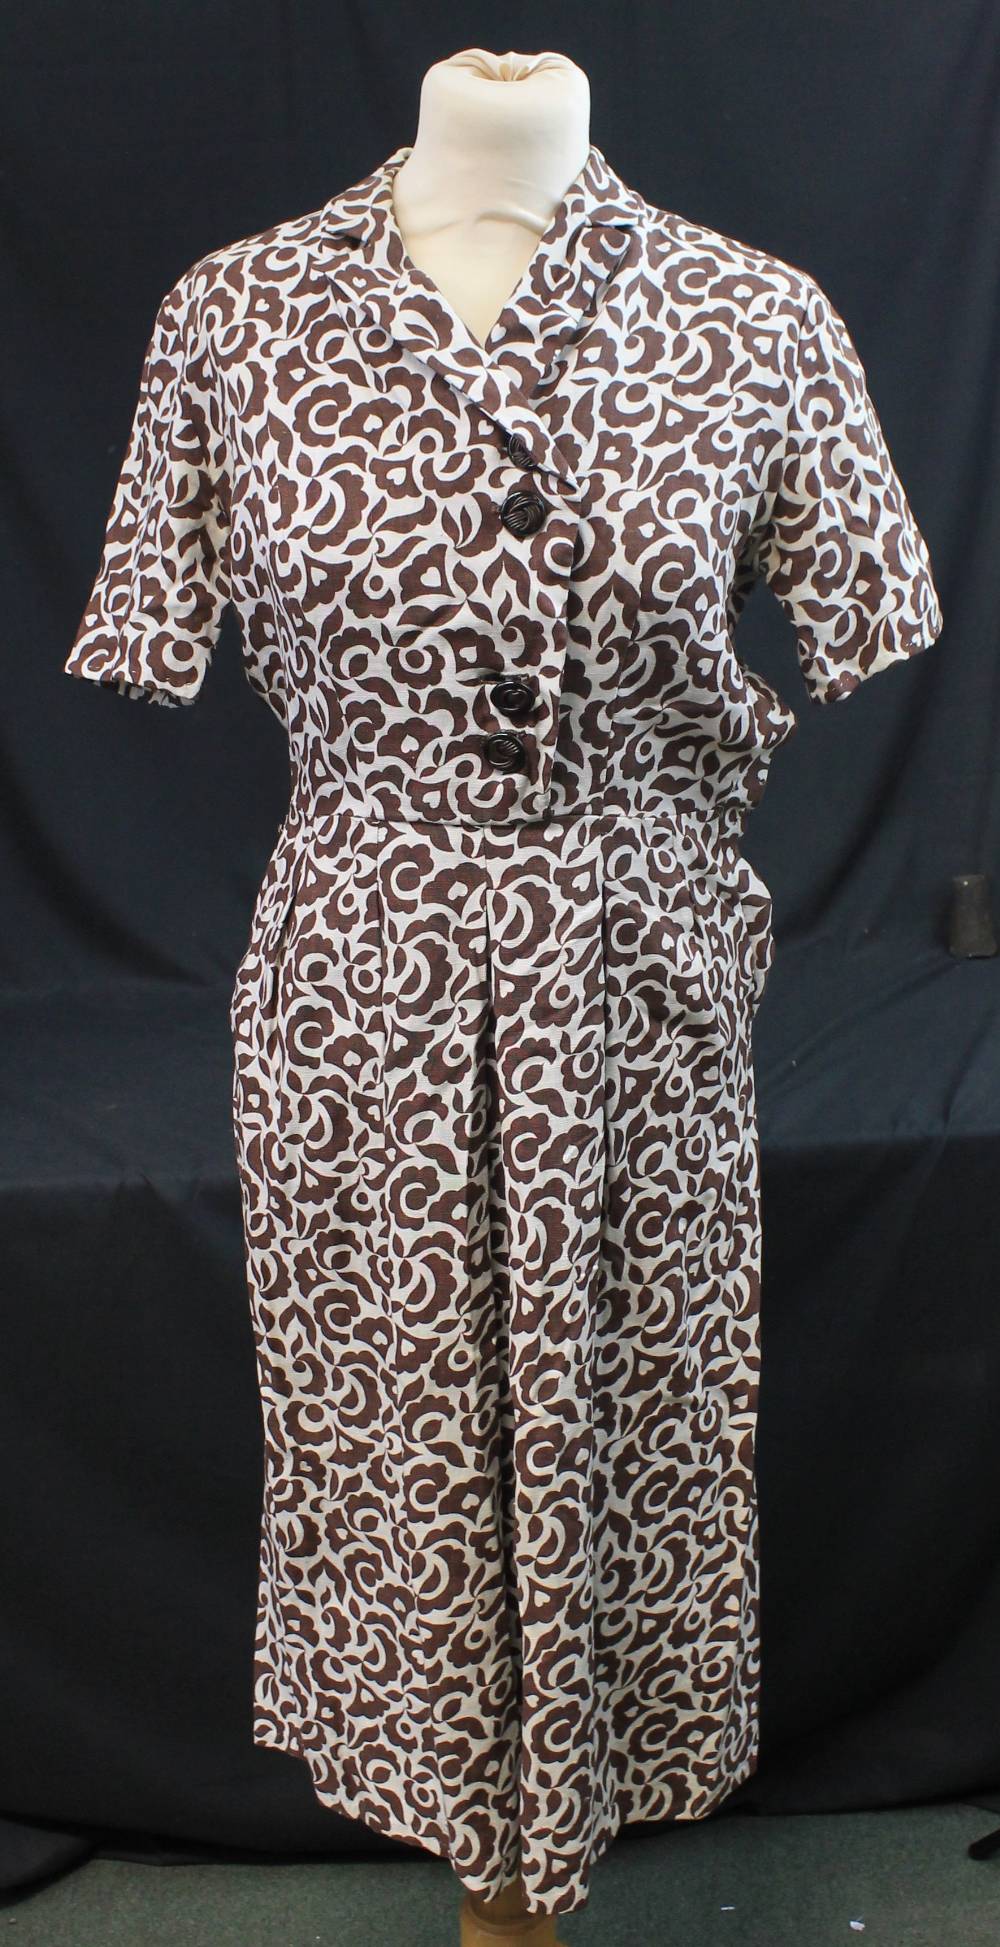 Collection of vintage dresses (40's-60's), to include: dark brown check empire line dress, - Image 4 of 5